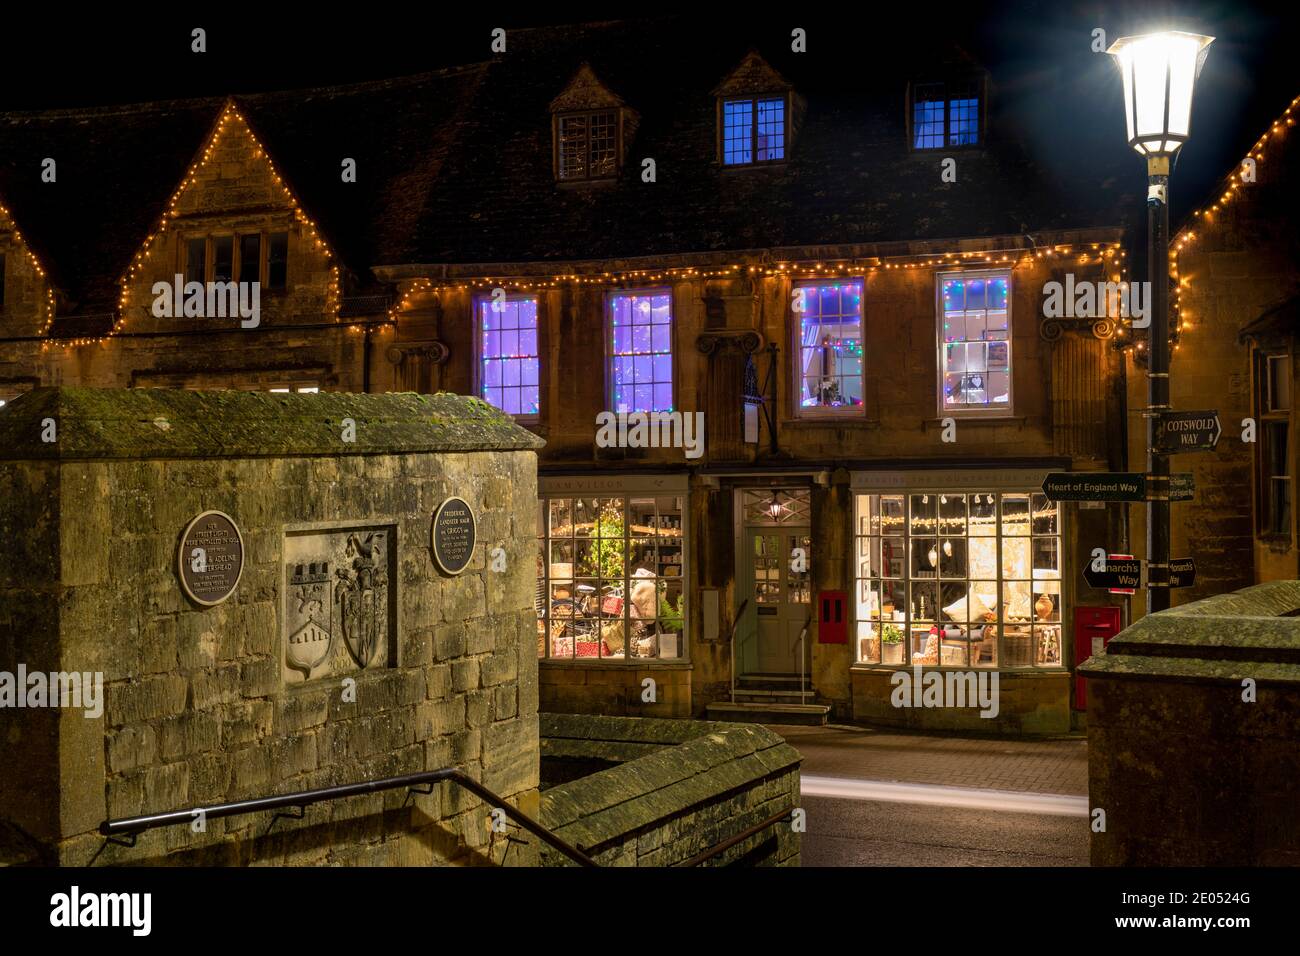 Chipping Campden high street shop with christmas lights and decorations at dusk. Chipping Campden, Cotswolds, Gloucestershire, England Stock Photo